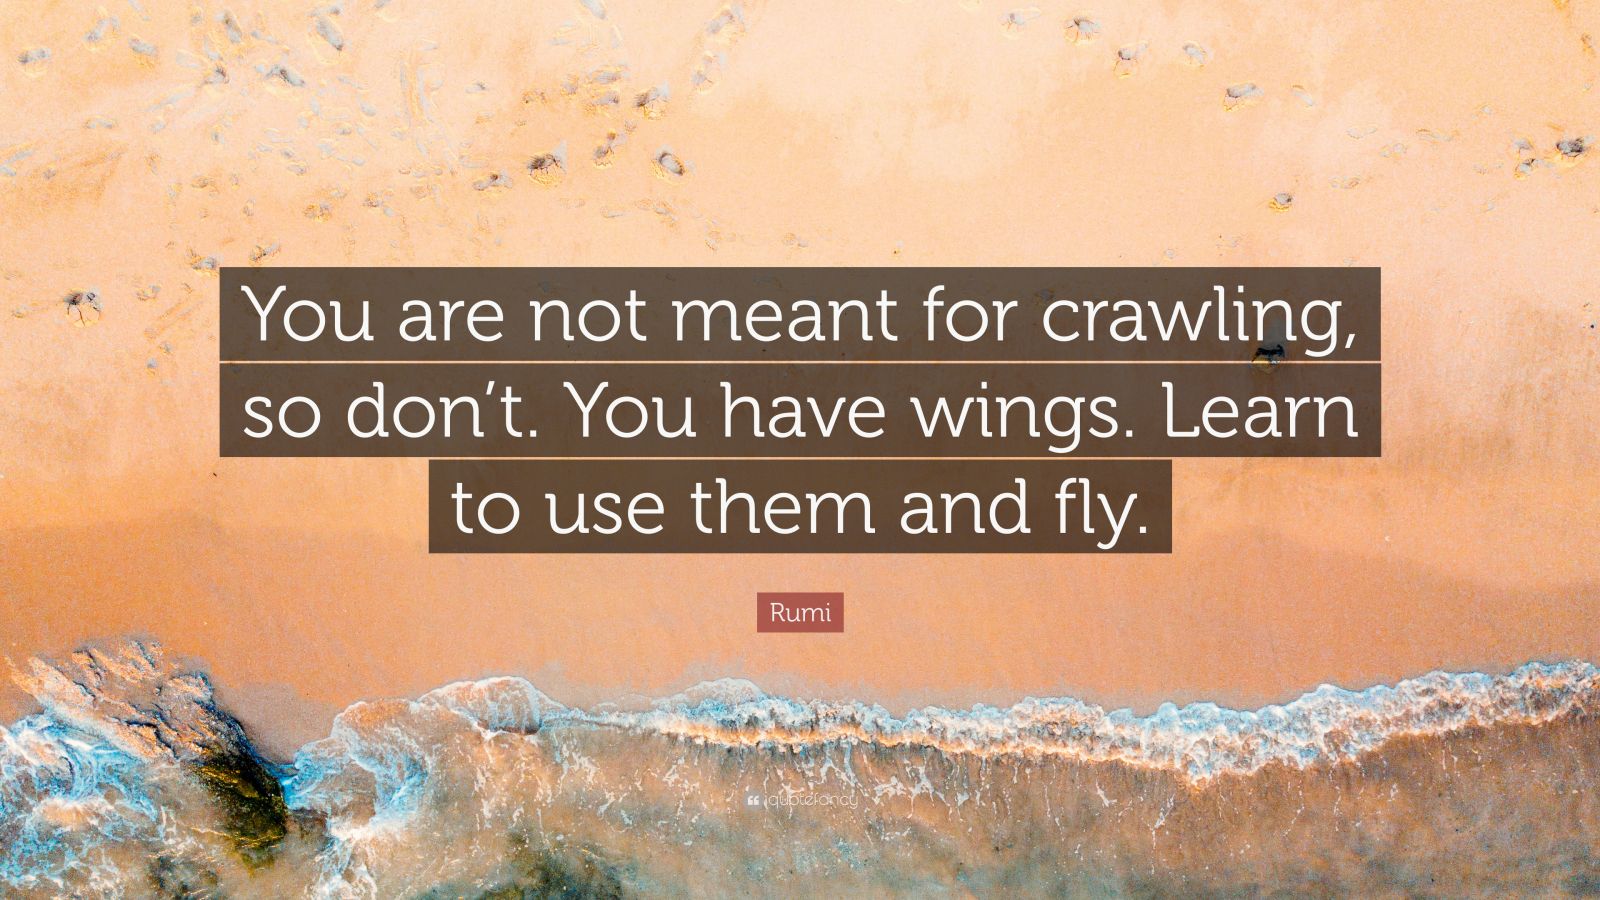 Rumi Quote: "You are not meant for crawling, so don't. You have wings. Learn to use them and fly ...